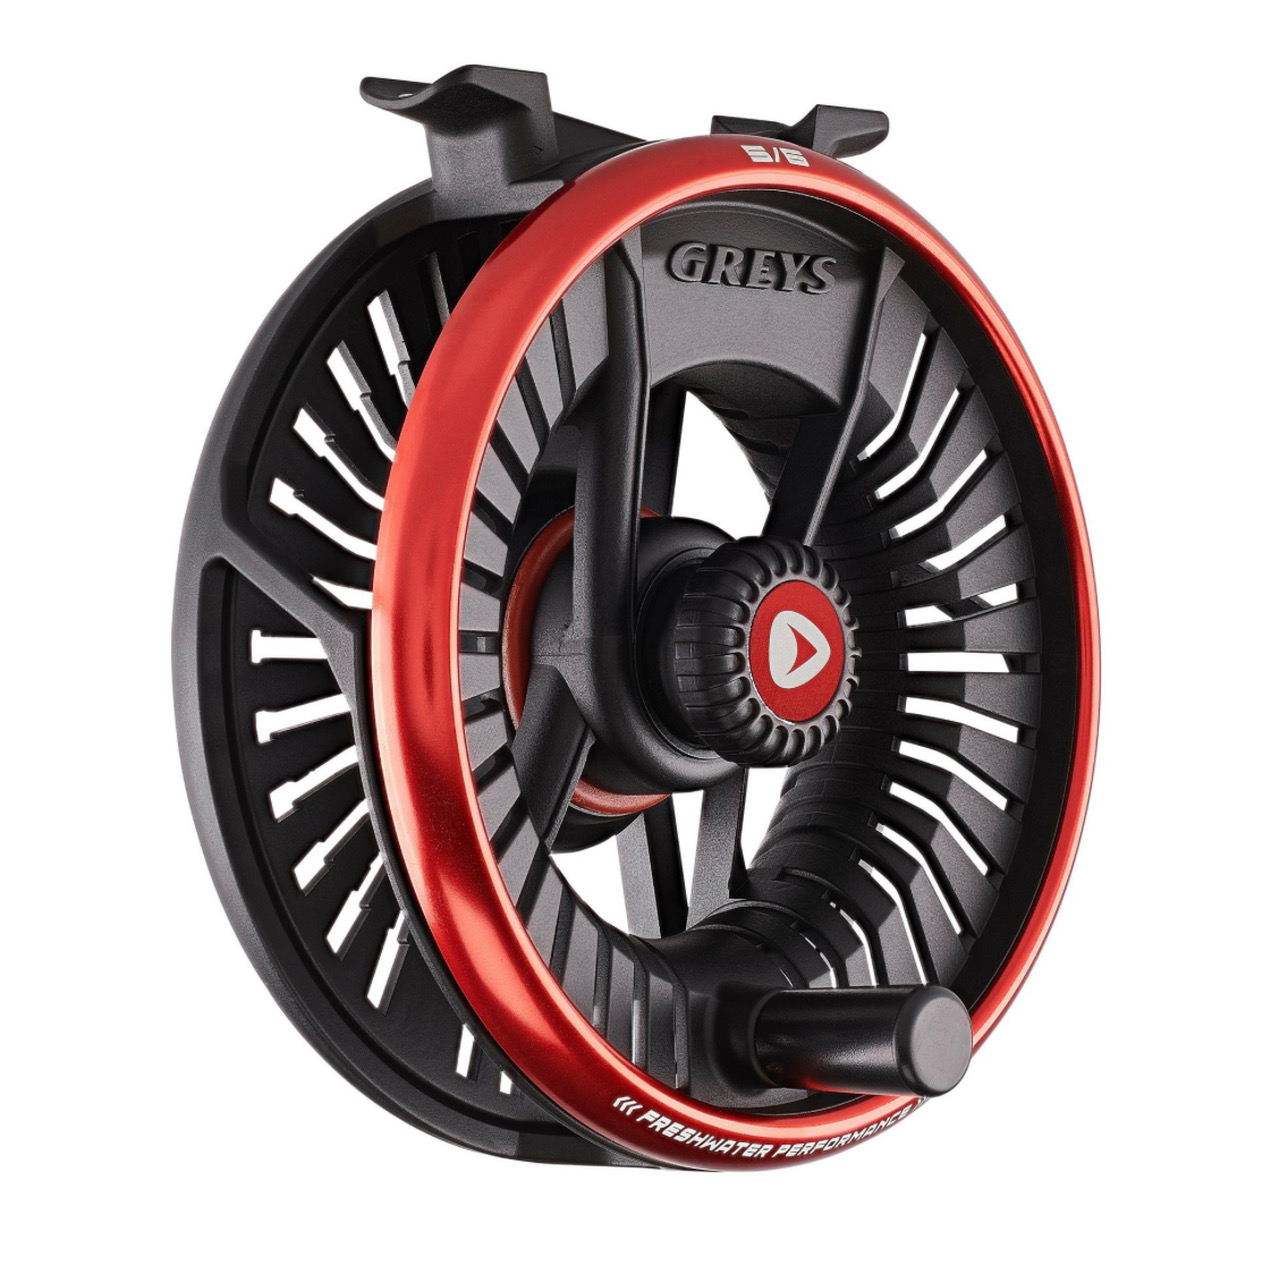 Greys Tail 5/6 Fly Reel